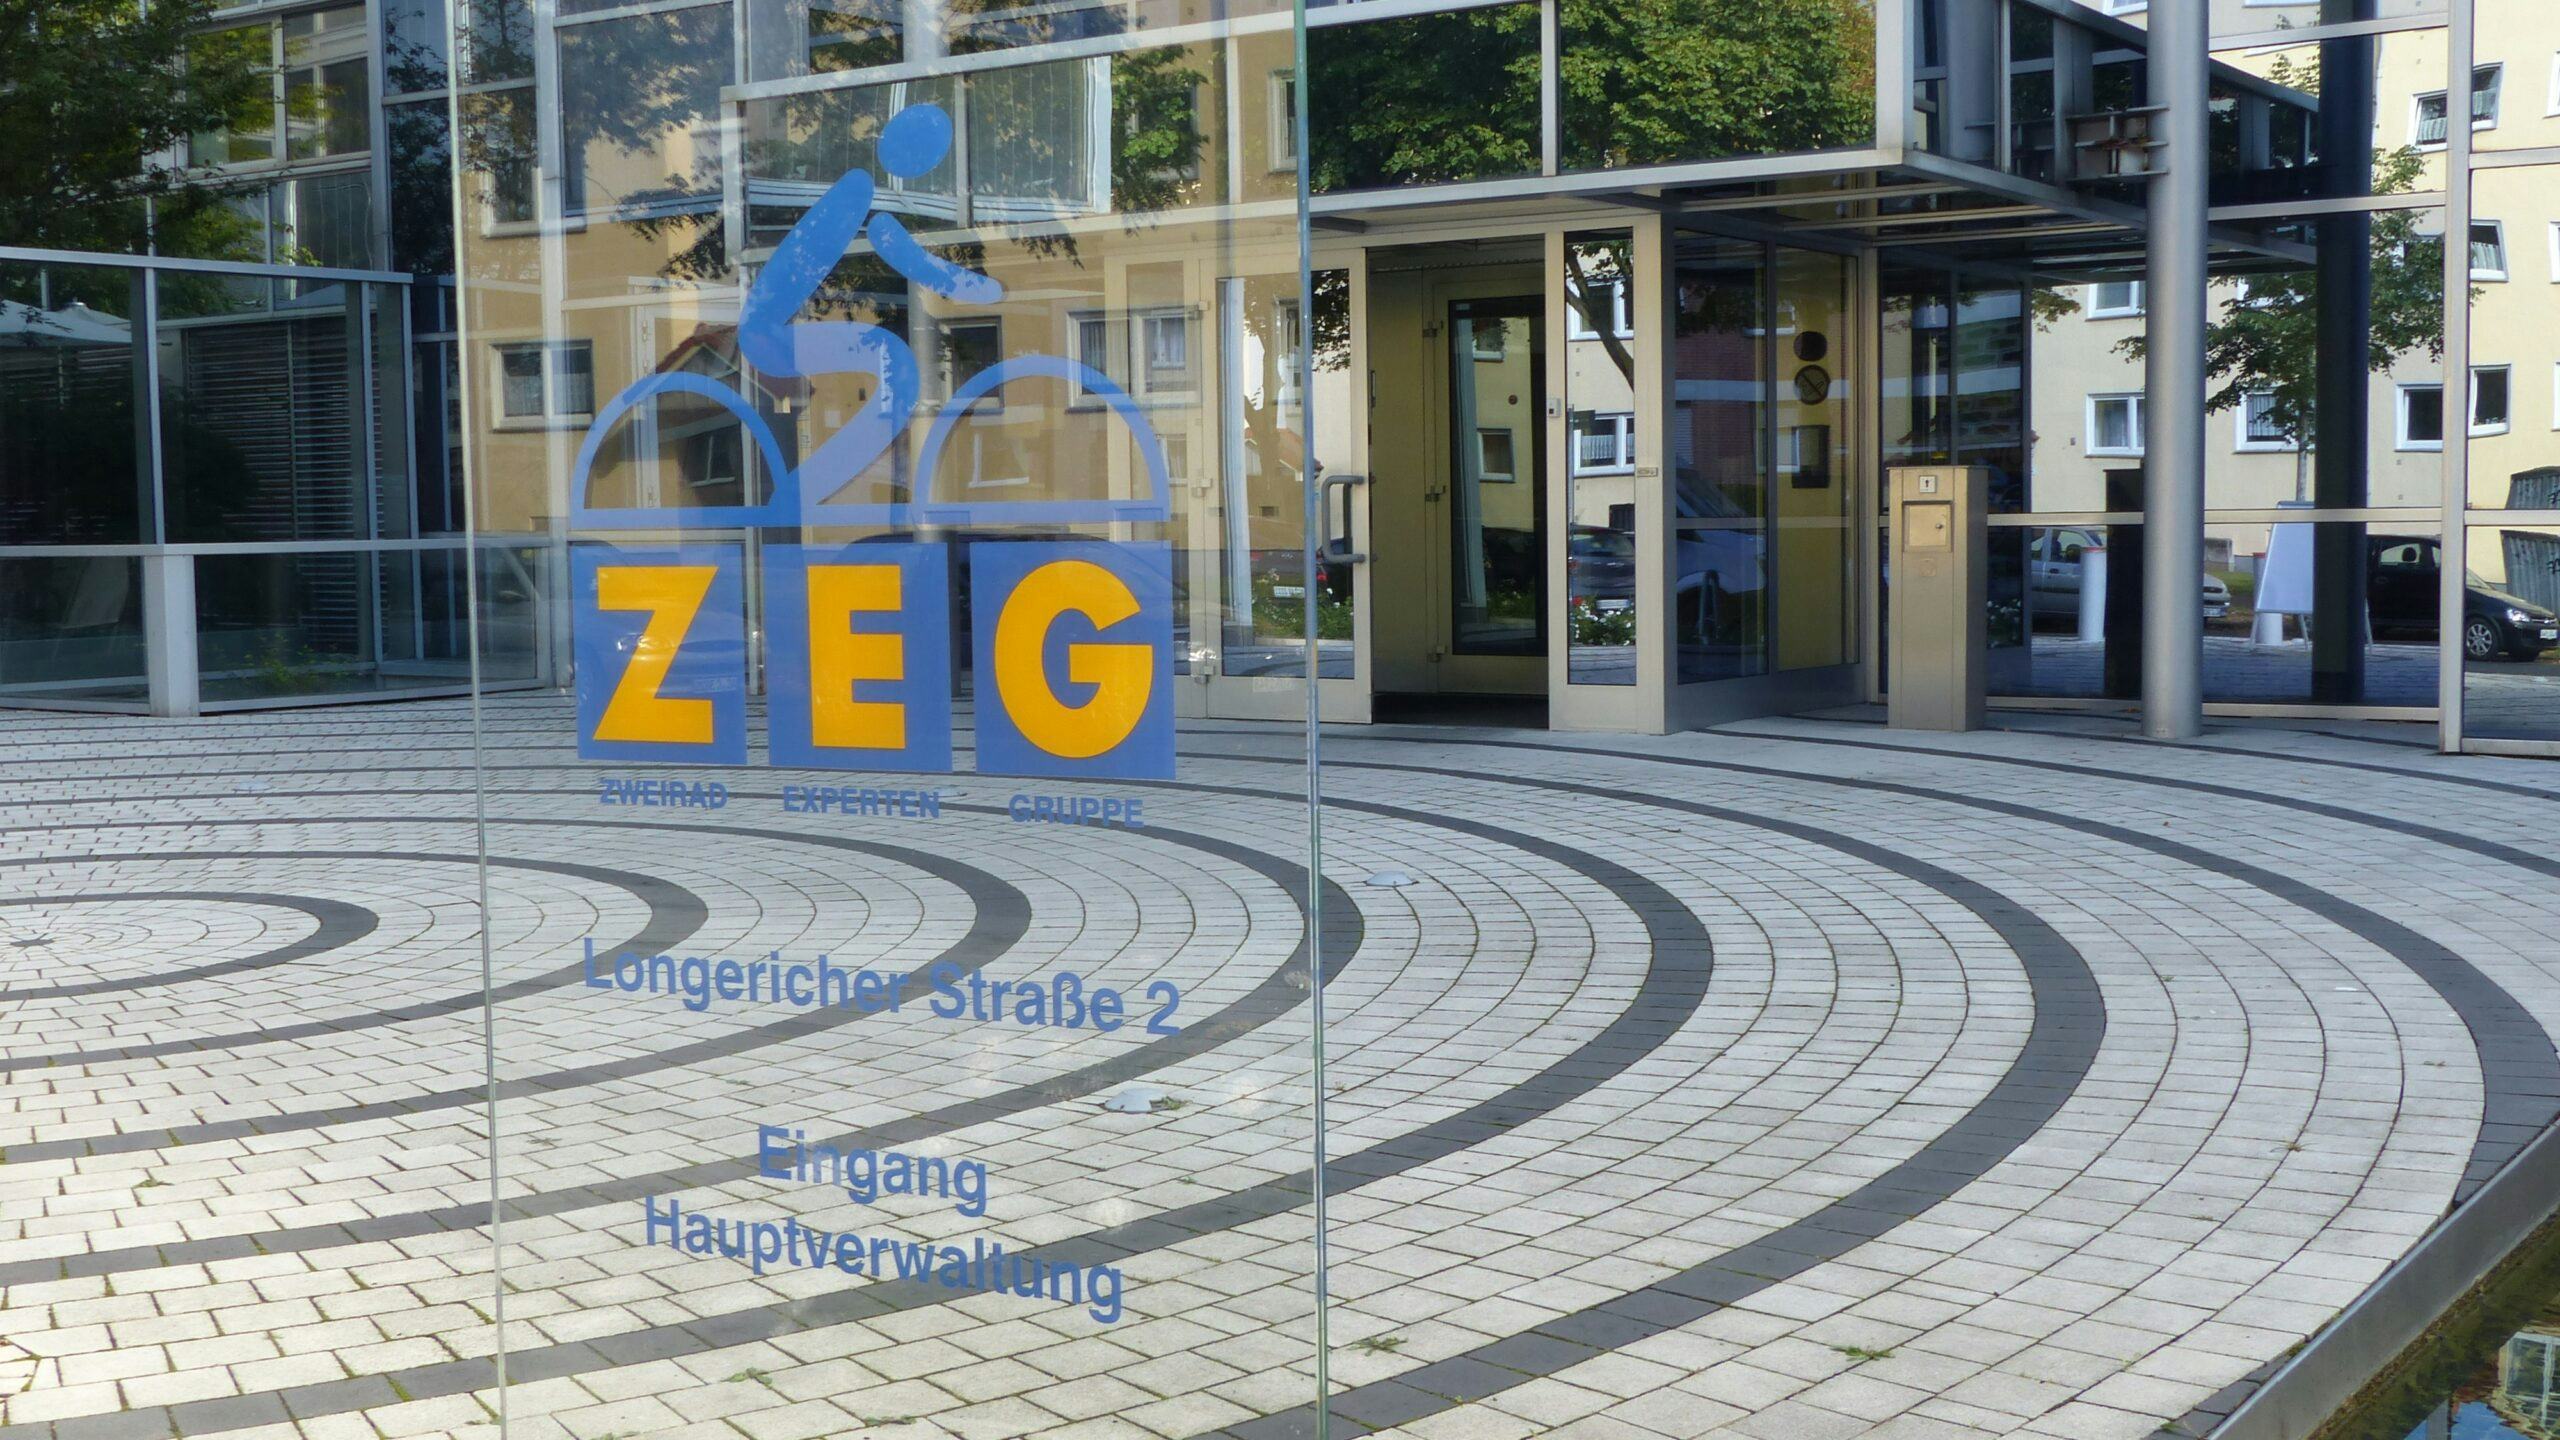 ZEG has successfully demonstrated sustainability practices at its headquarters in Cologne. – Photo Bike Europe